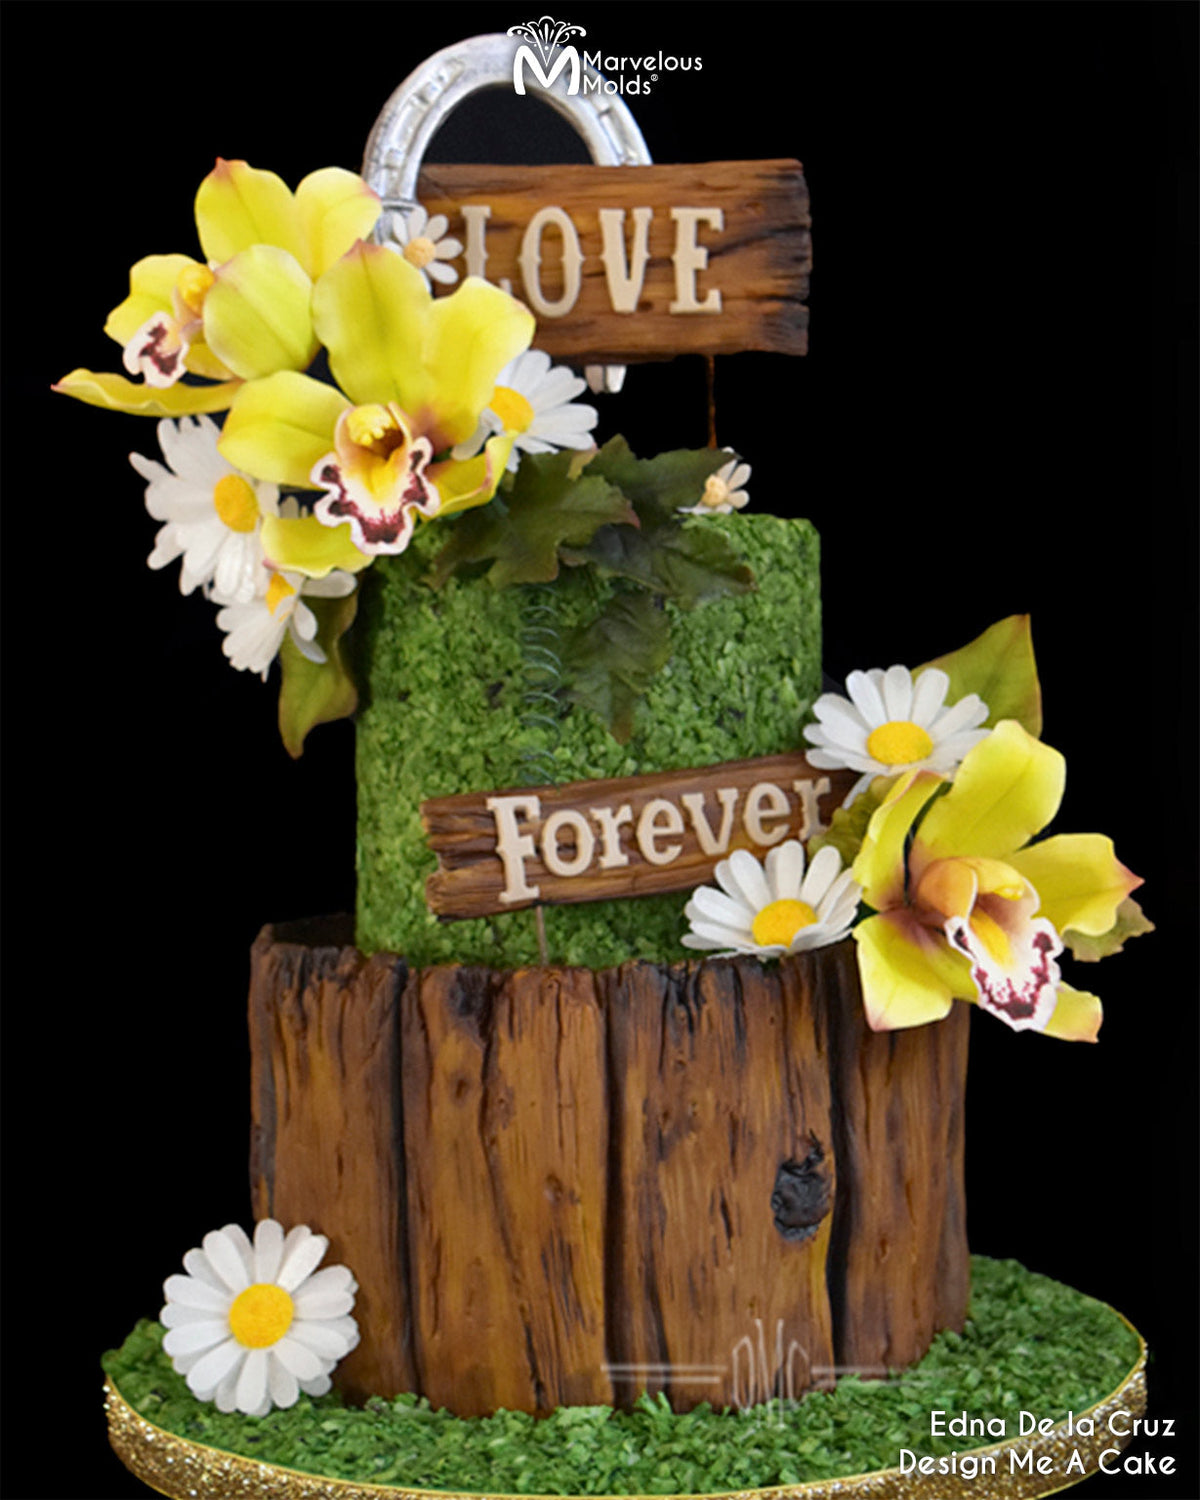 Western Themed Wedding Cake Decorated with the Western Lettering Flexabet by Marvelous Molds